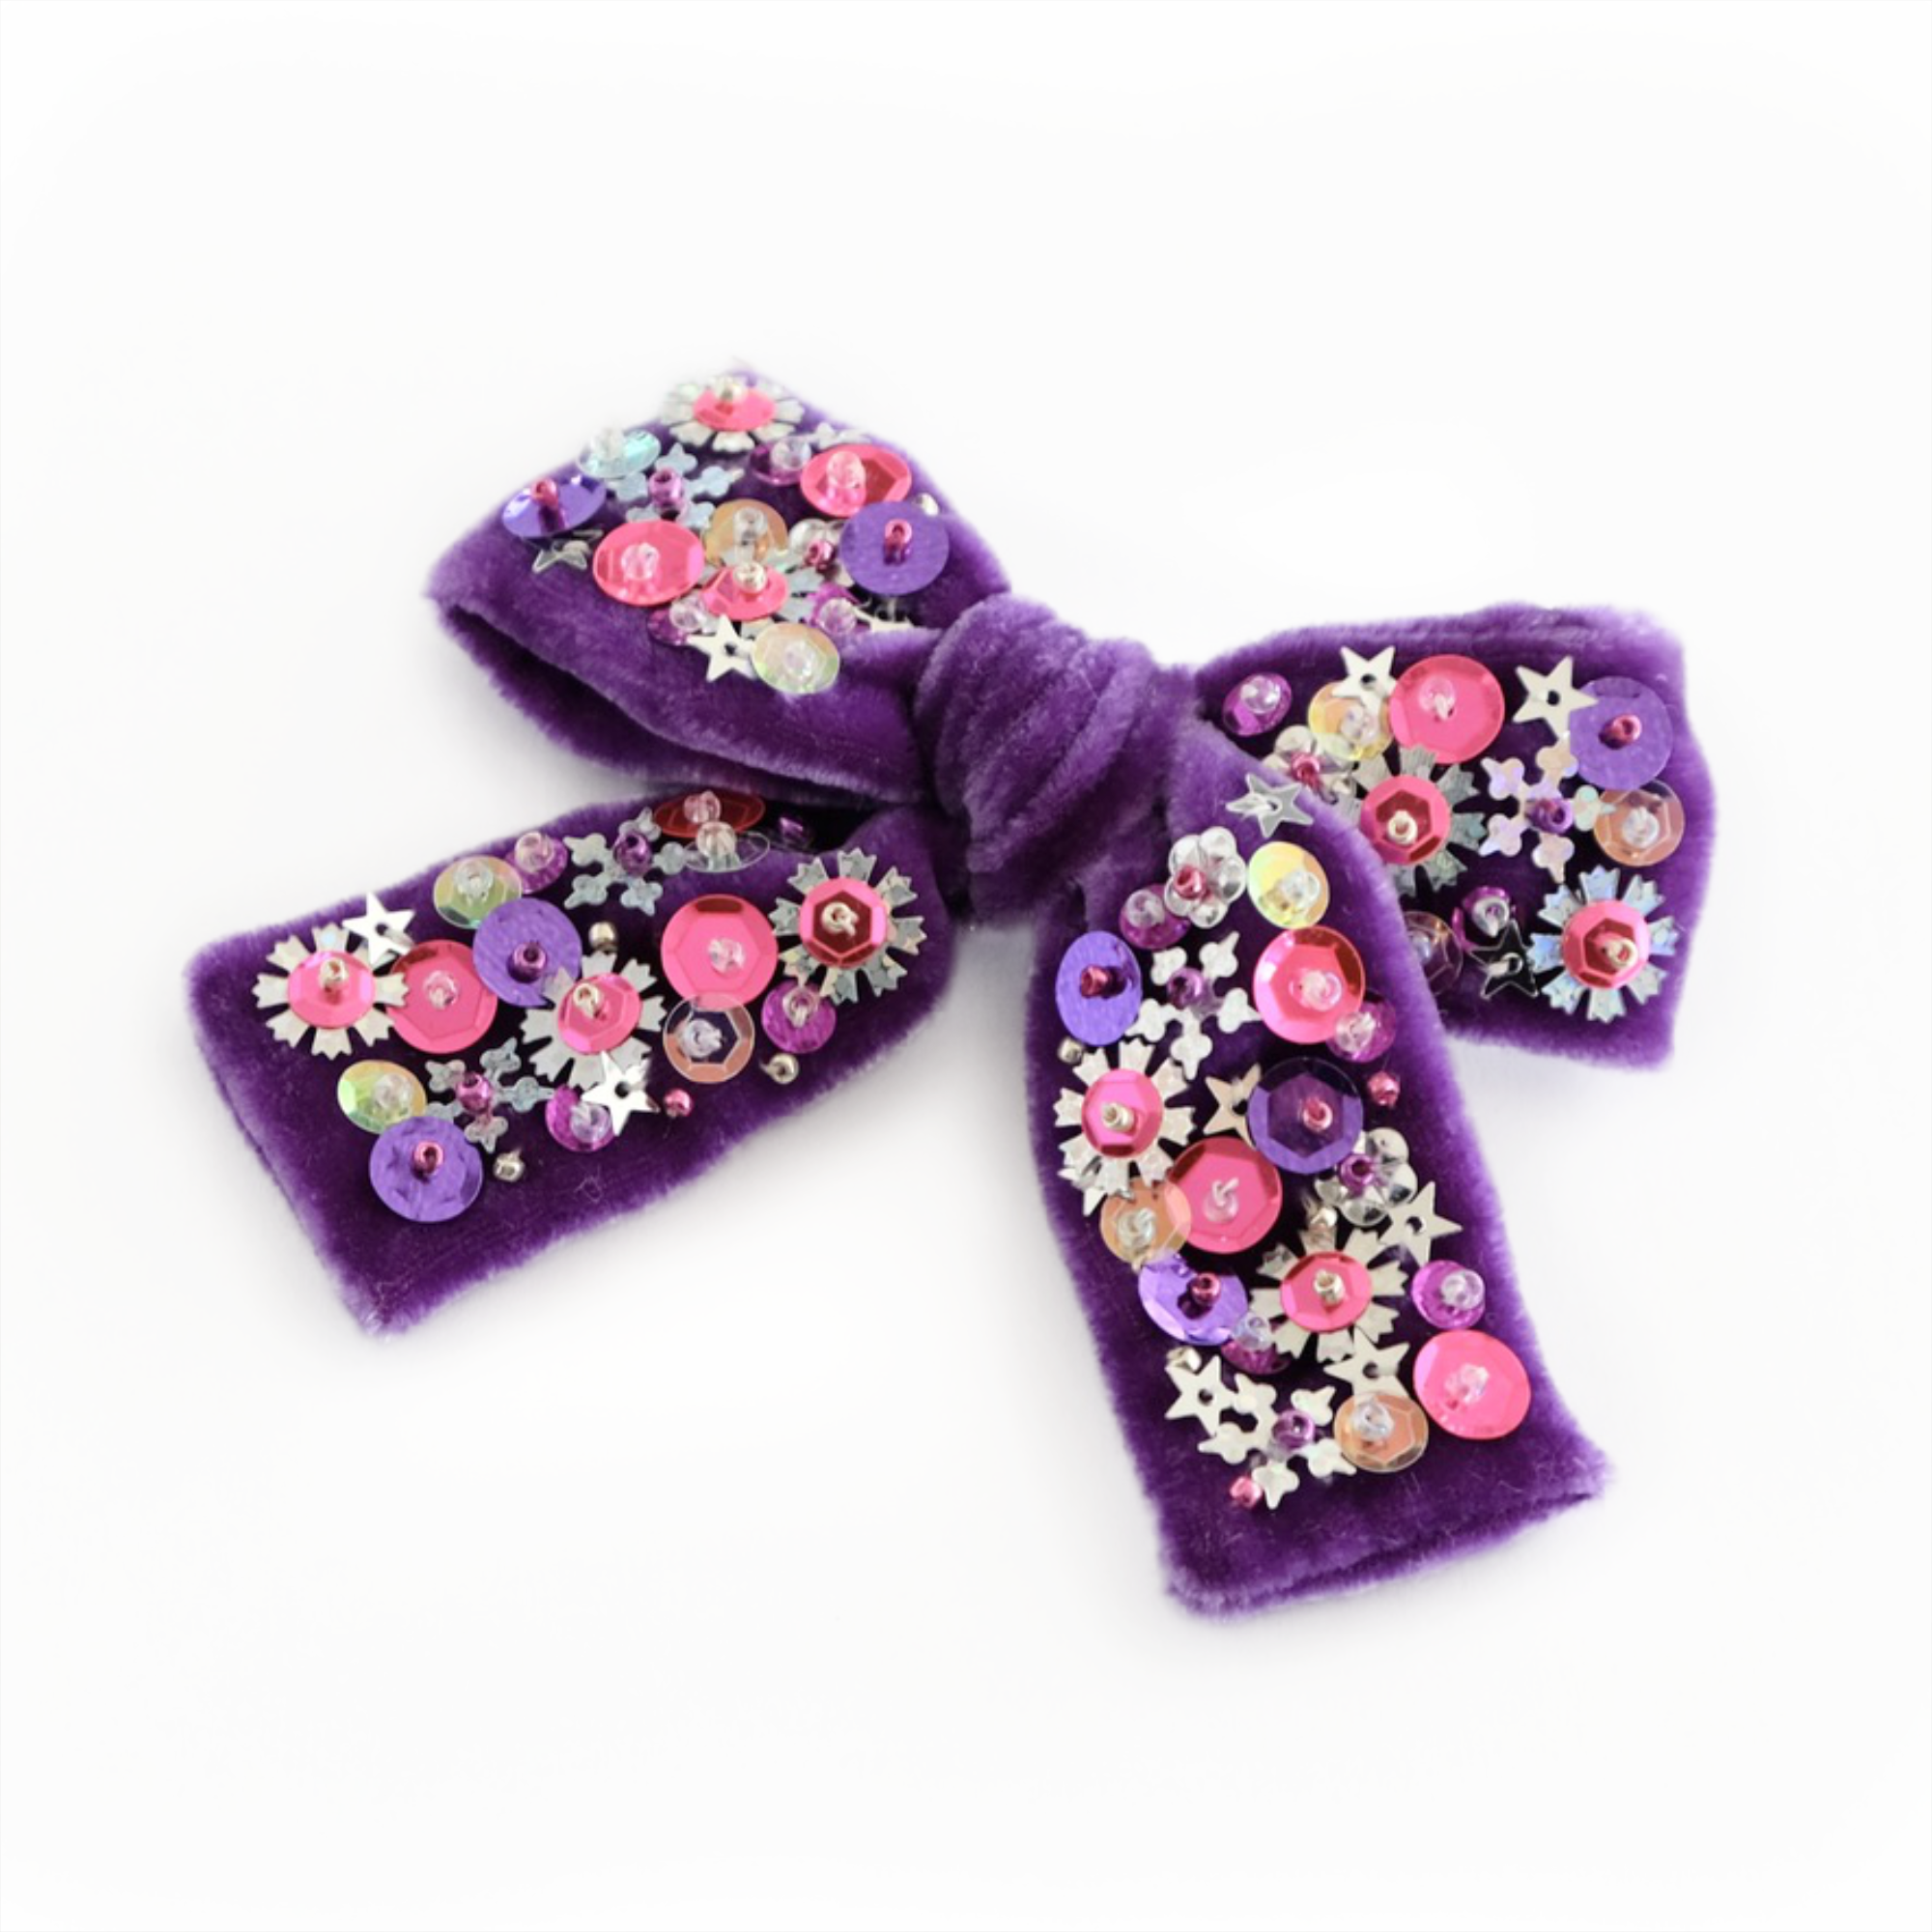 Neon Rose, new sequin hair bow by doodlelidoo, made from beautiful purple velvet and gorgeous neon pink sequin.